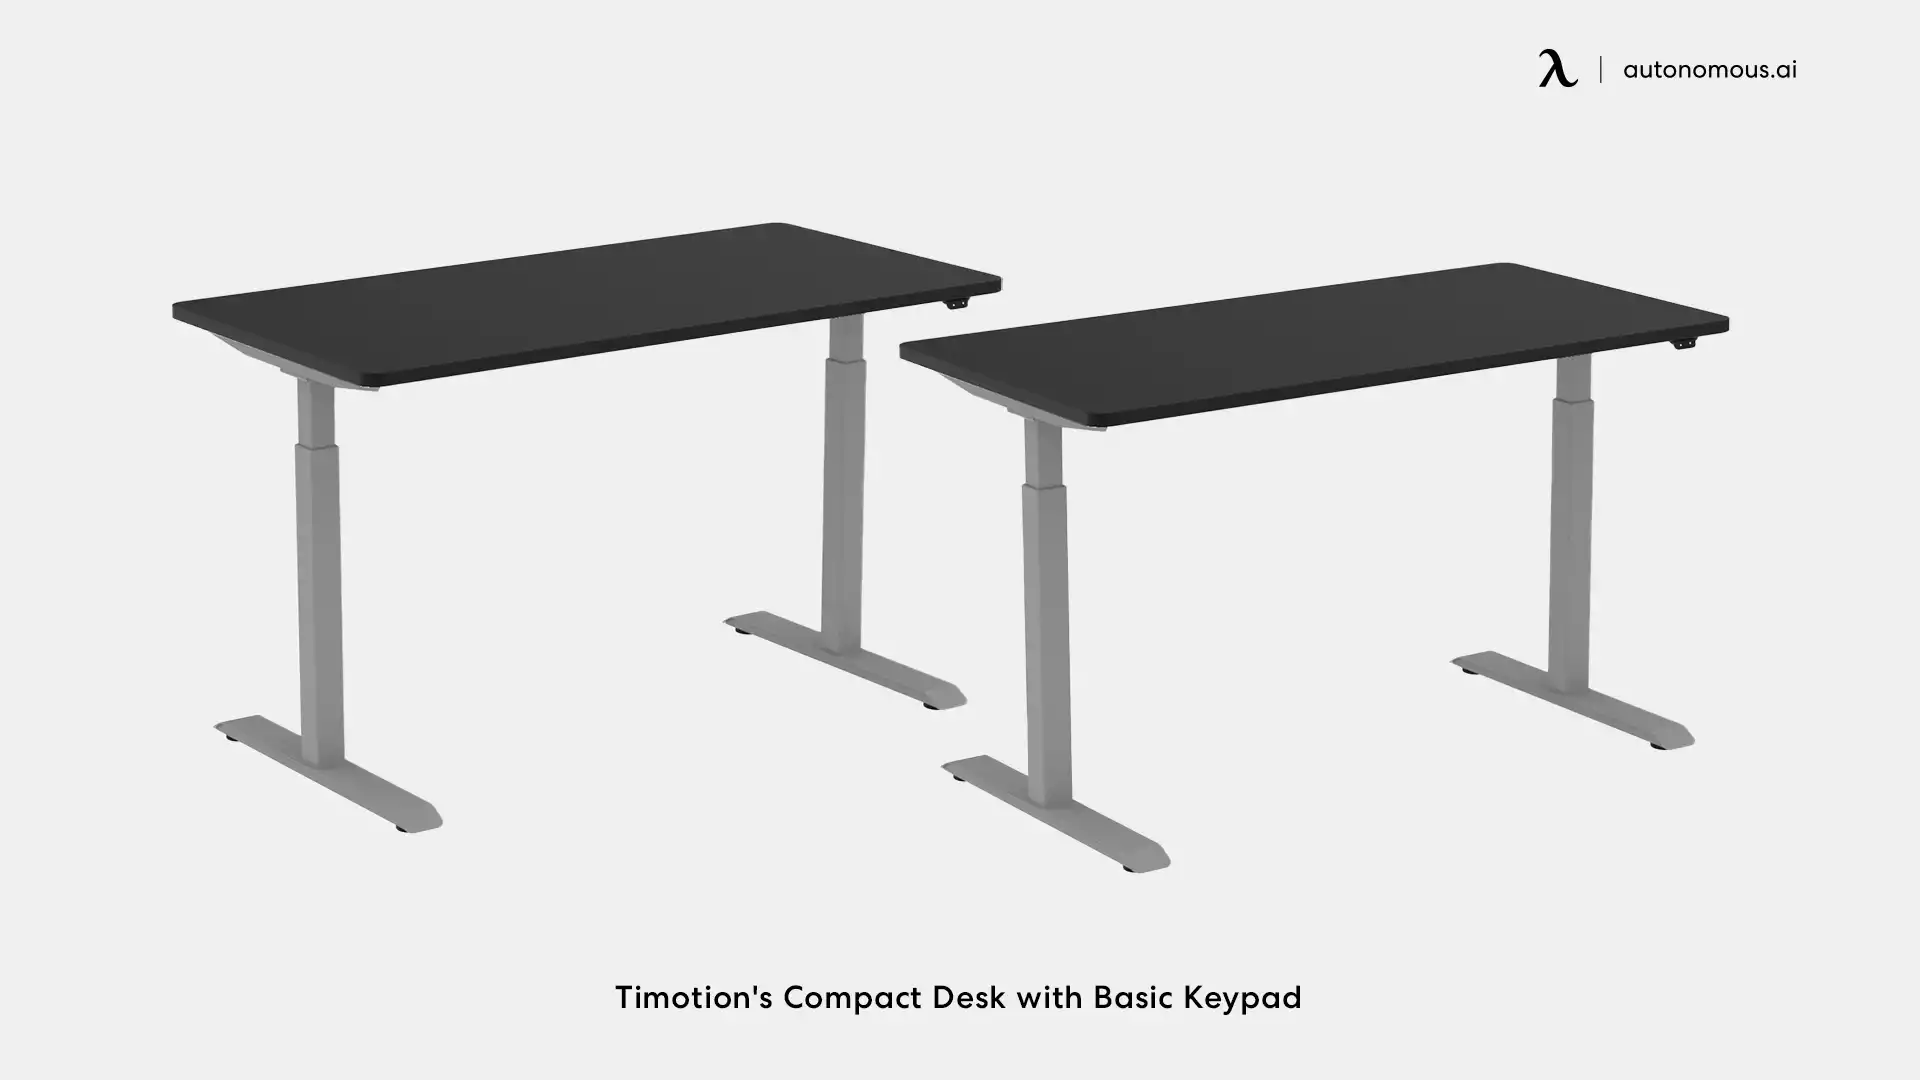 Timotion's Compact Desk with Basic Keypad